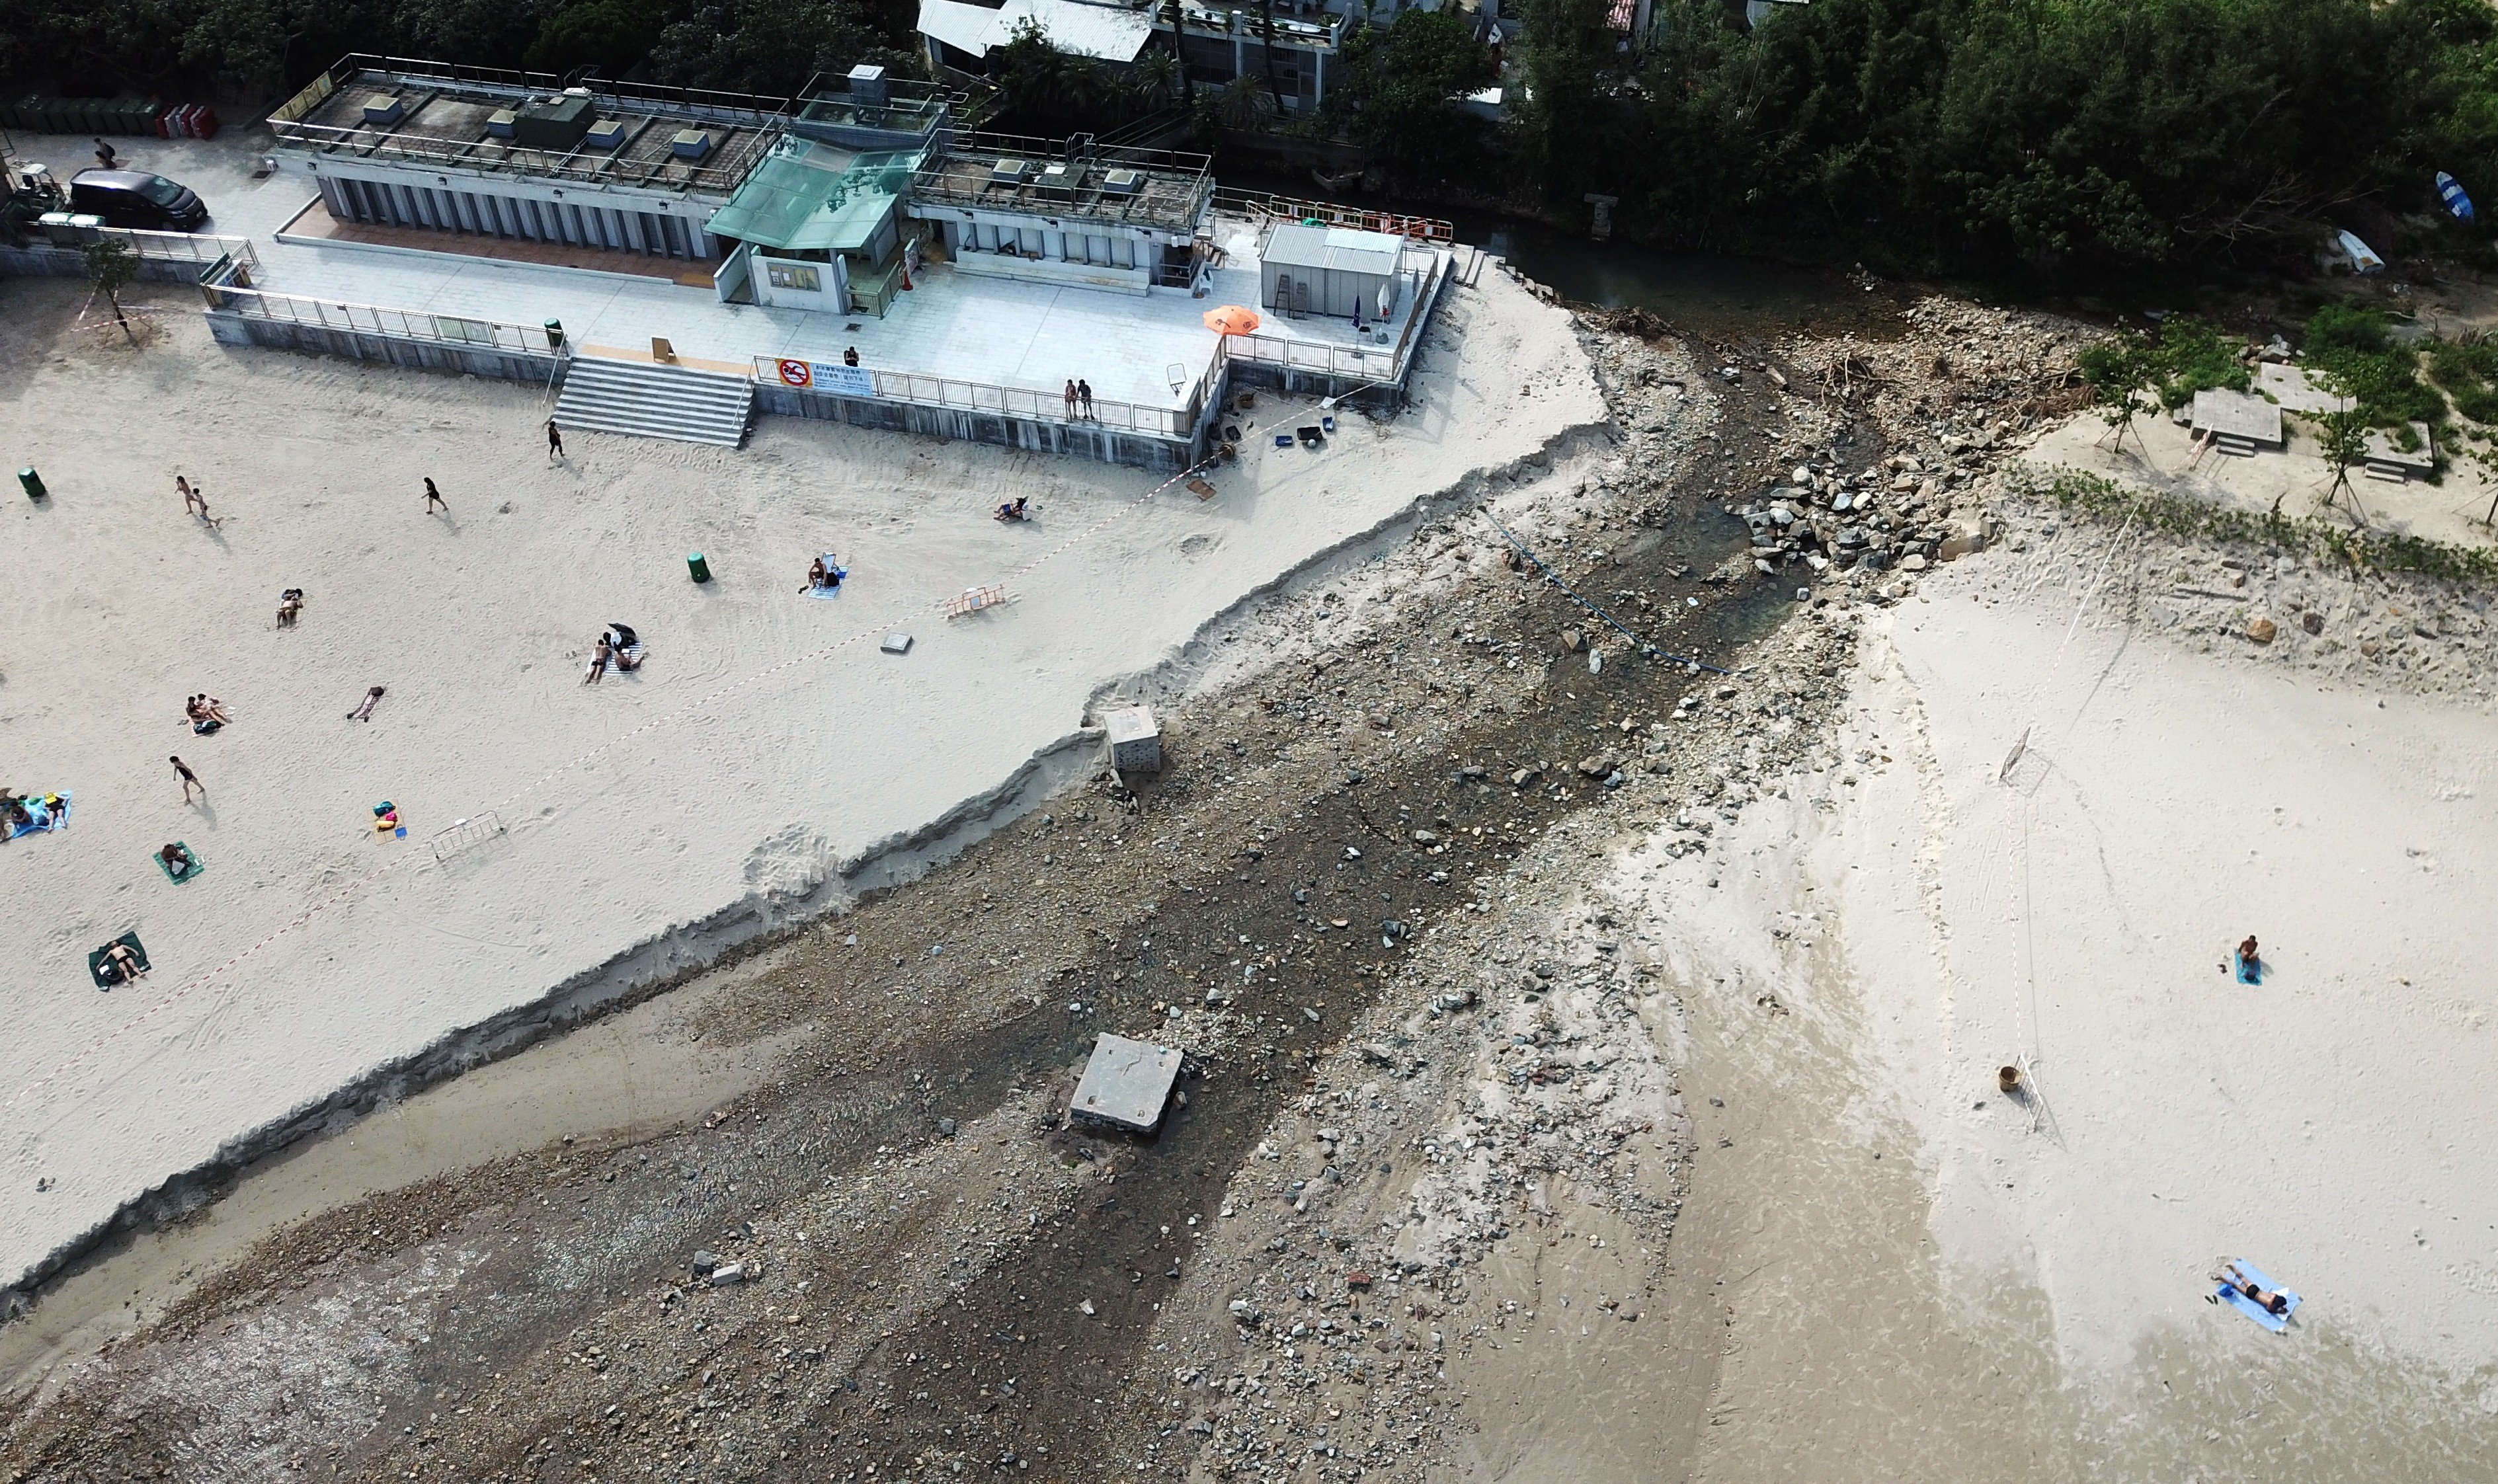 Big Wave Bay beach in Shek O on Thursday. The river broke its banks during heavy rain on Tuesday and drove a stream of rocks and debris to the sea. Photo: Antony Dickson